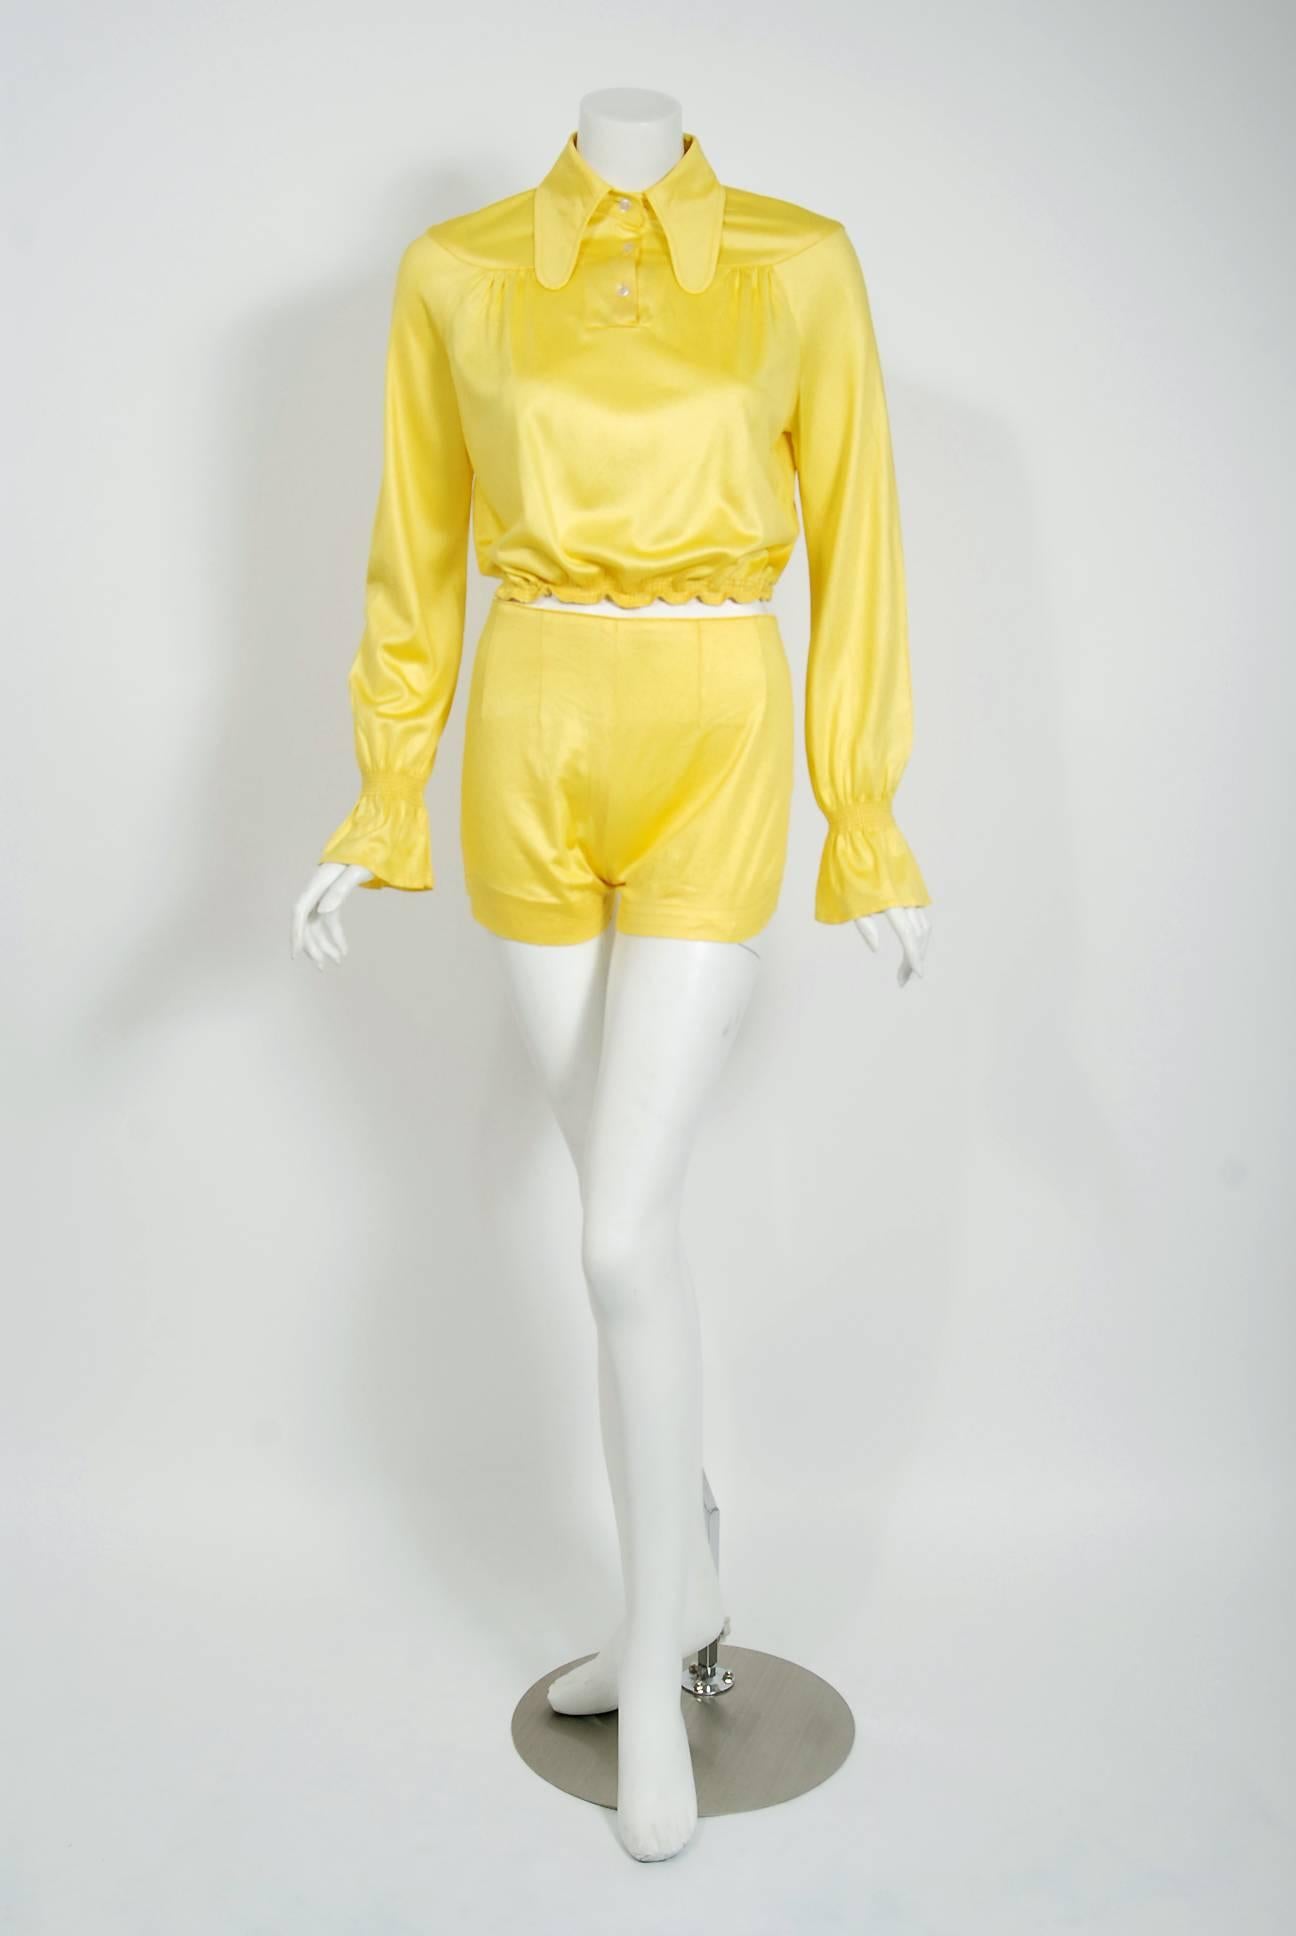 A captivating buttercup yellow Ossie Clark for Radley ensemble dating back to the mid 1970's. This rare set is fashioned from tricel jersey which has a lovely shine when worn. I also adore the dramatic three-button beagle collar cropped blouse with